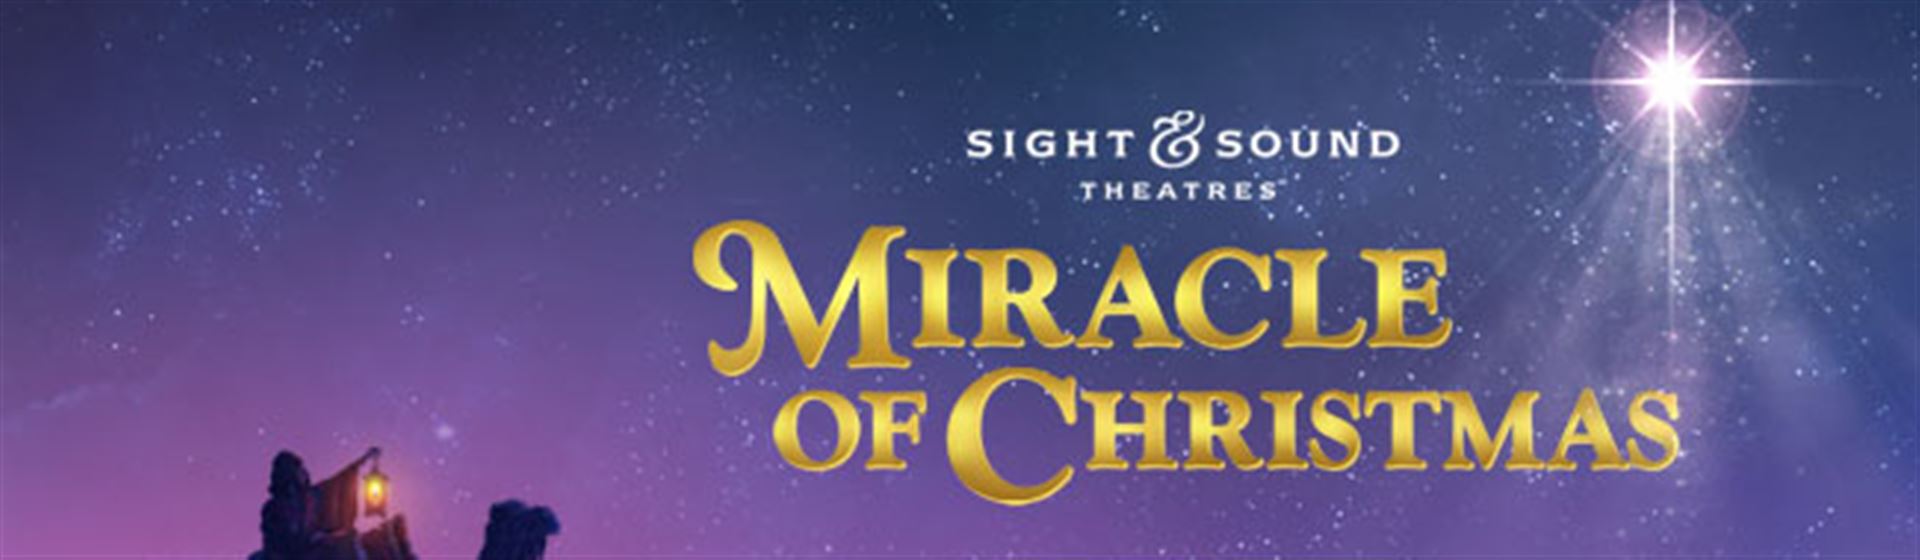 Sight & Sound Theatres: Miracle of Christmas